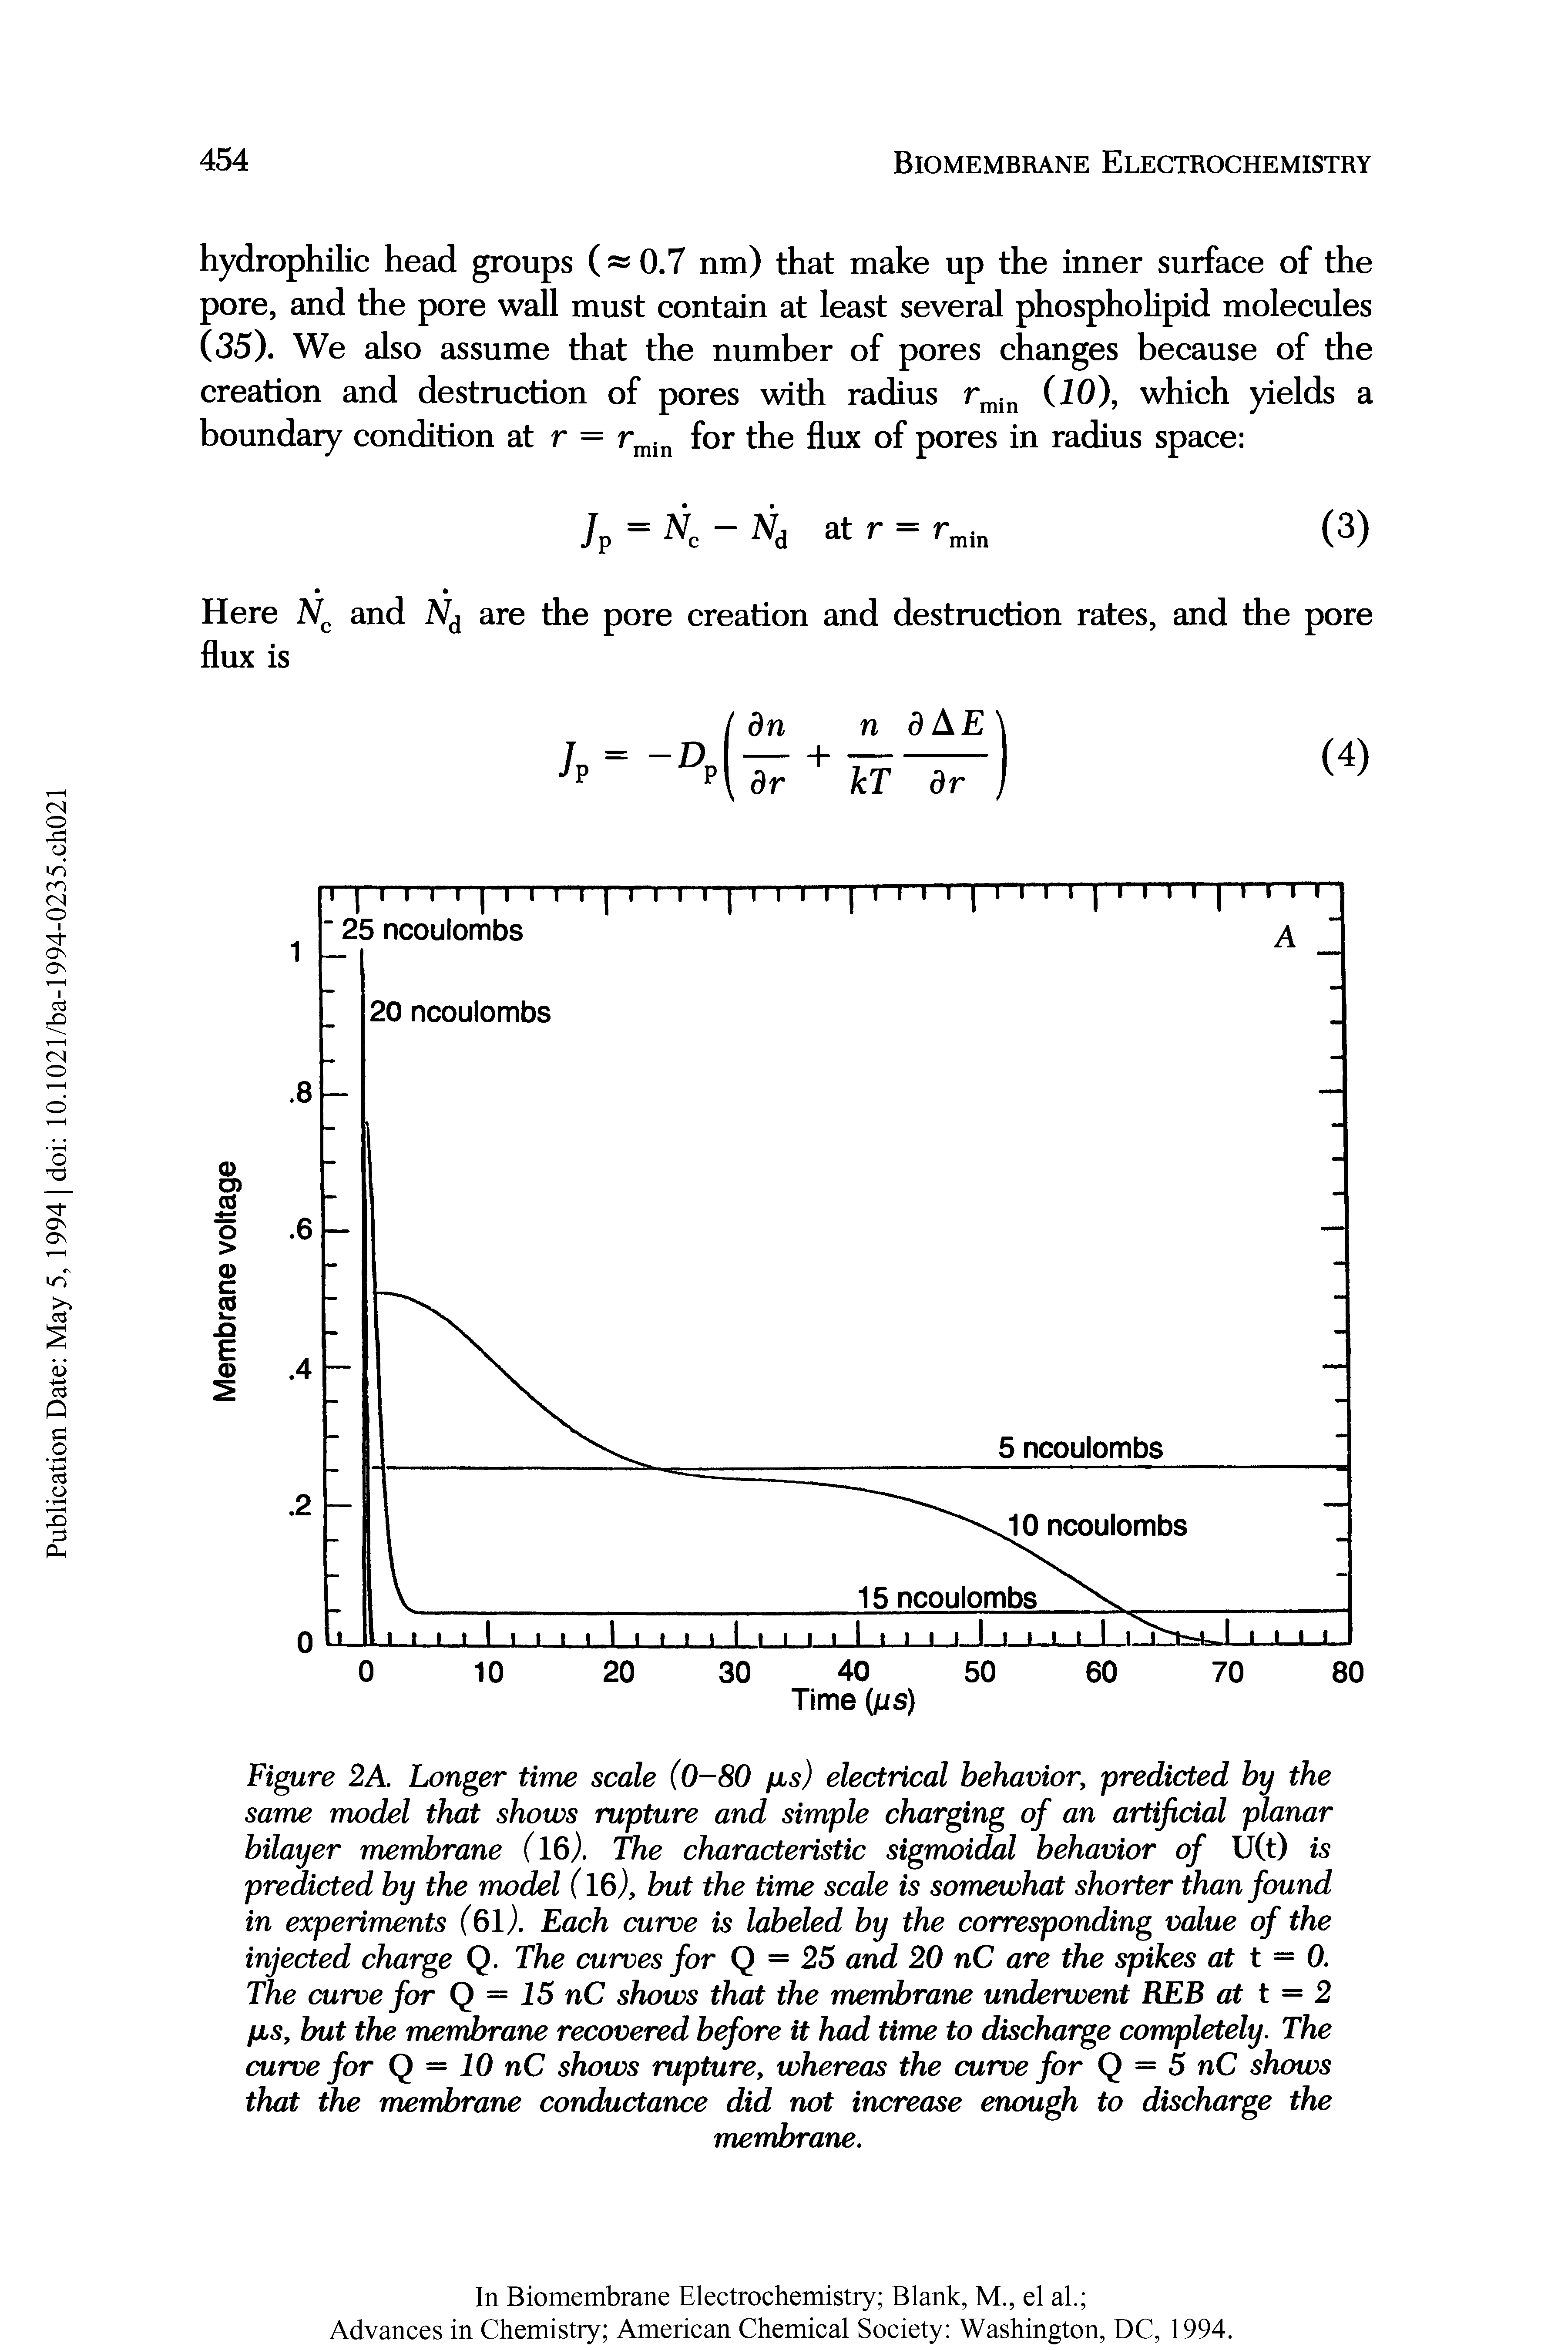 Figure 2A. Longer time scale (0-80 /is) electrical behavior, predicted by the same model that shows rupture and simple charging of an artificial planar bilayer membrane (16). The characteristic sigmoidal behavior of U(t) is predicted by the model (16), but the time scale is somewhat shorter than found in experiments (61). Each curve is labeled by the corresponding value of the injected charge Q. The curves for Q — 25 and 20 nC are the spikes at t — 0. The curve for Q = 15 nC shows that the membrane underwent REB at t = 2 pus, but the membrane recovered before it had time to discharge completely. The curve for Q = 10 nC shows rupture, whereas the curve for Q = 5 nC shows that the membrane conductance did not increase enough to discharge the...